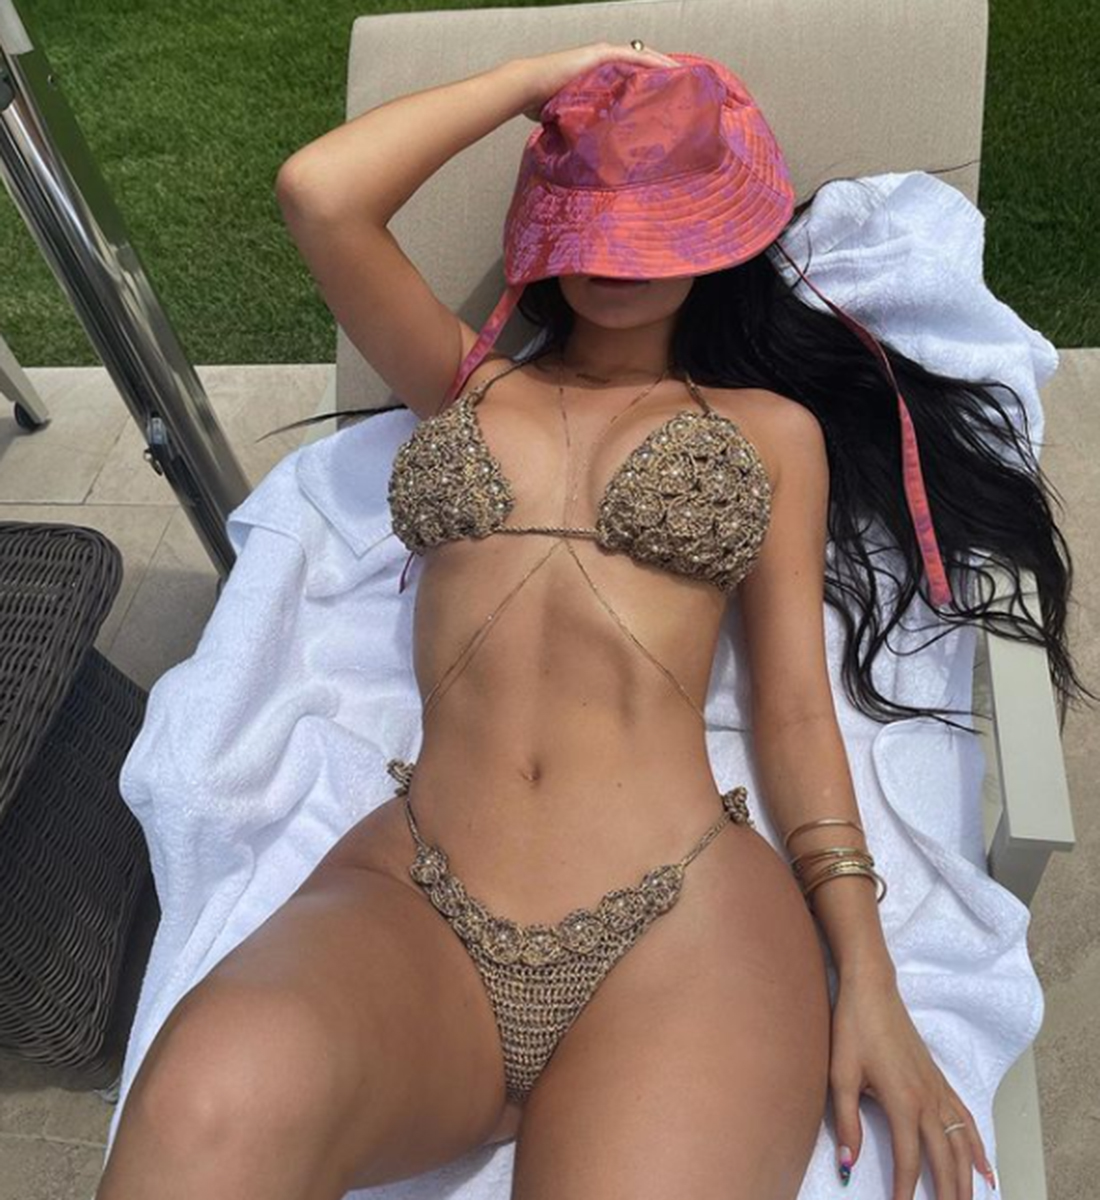 Kylie πη struck again with outrageously revealing photos! 14